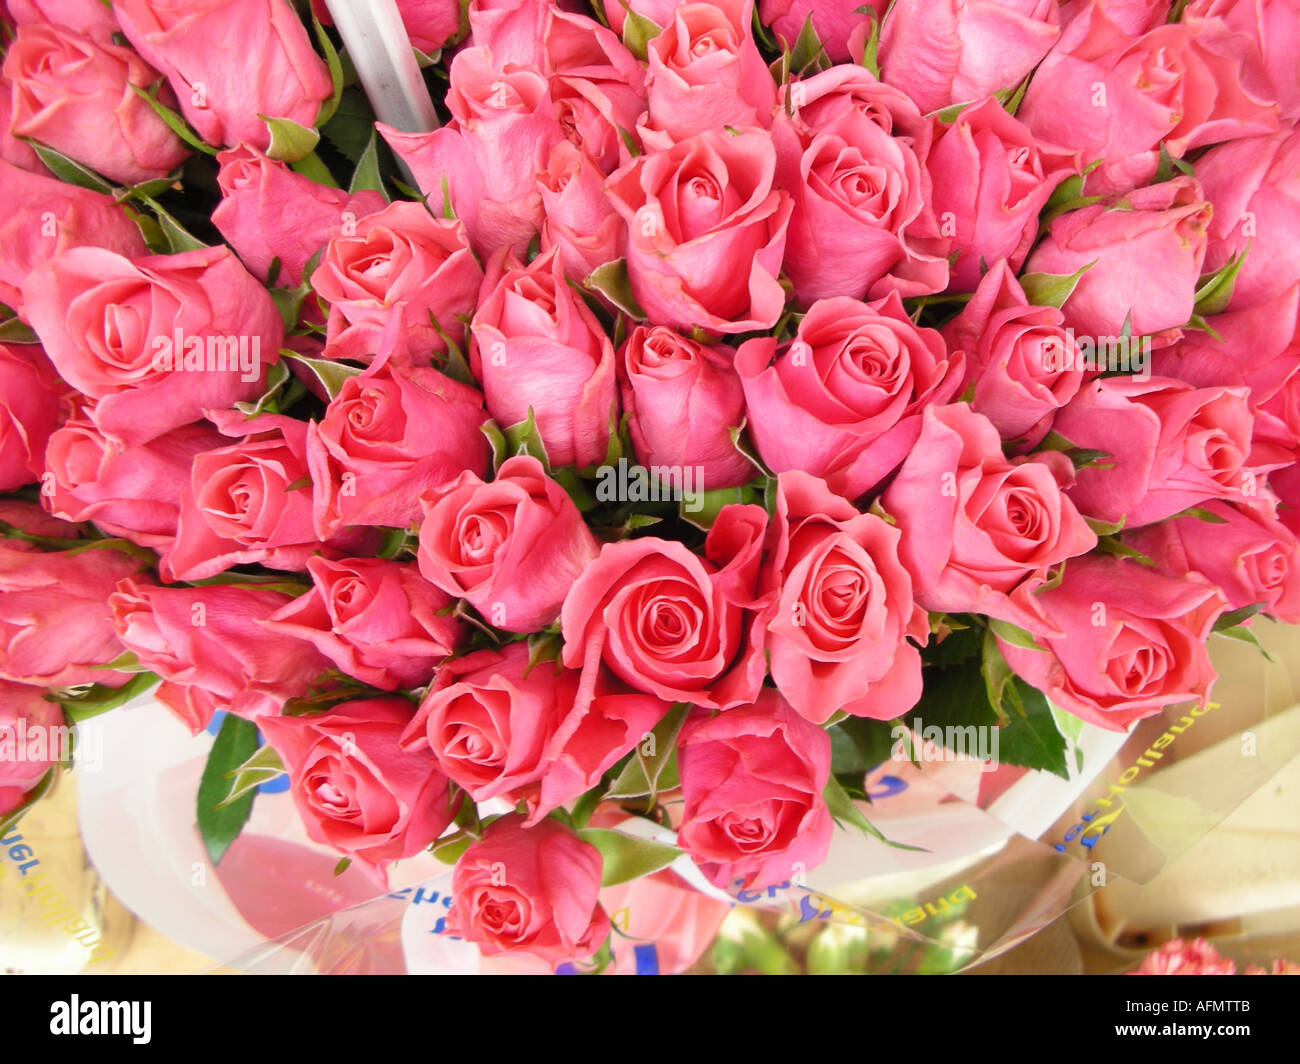 Market stall display of pink roses at florist's flower stall Stock Photo